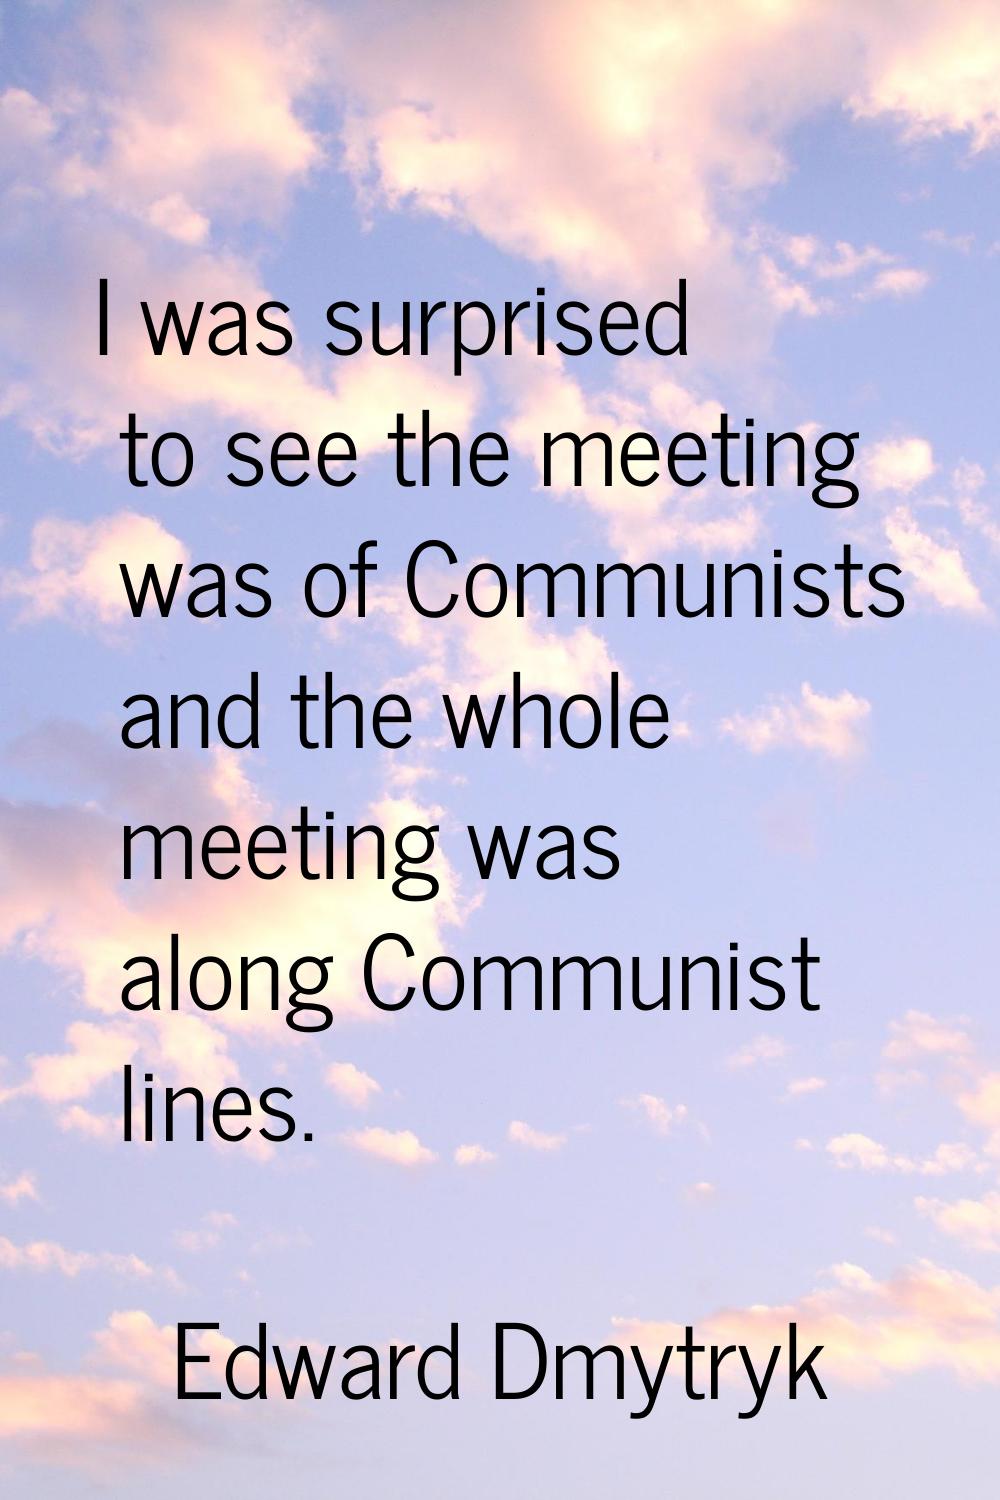 I was surprised to see the meeting was of Communists and the whole meeting was along Communist line